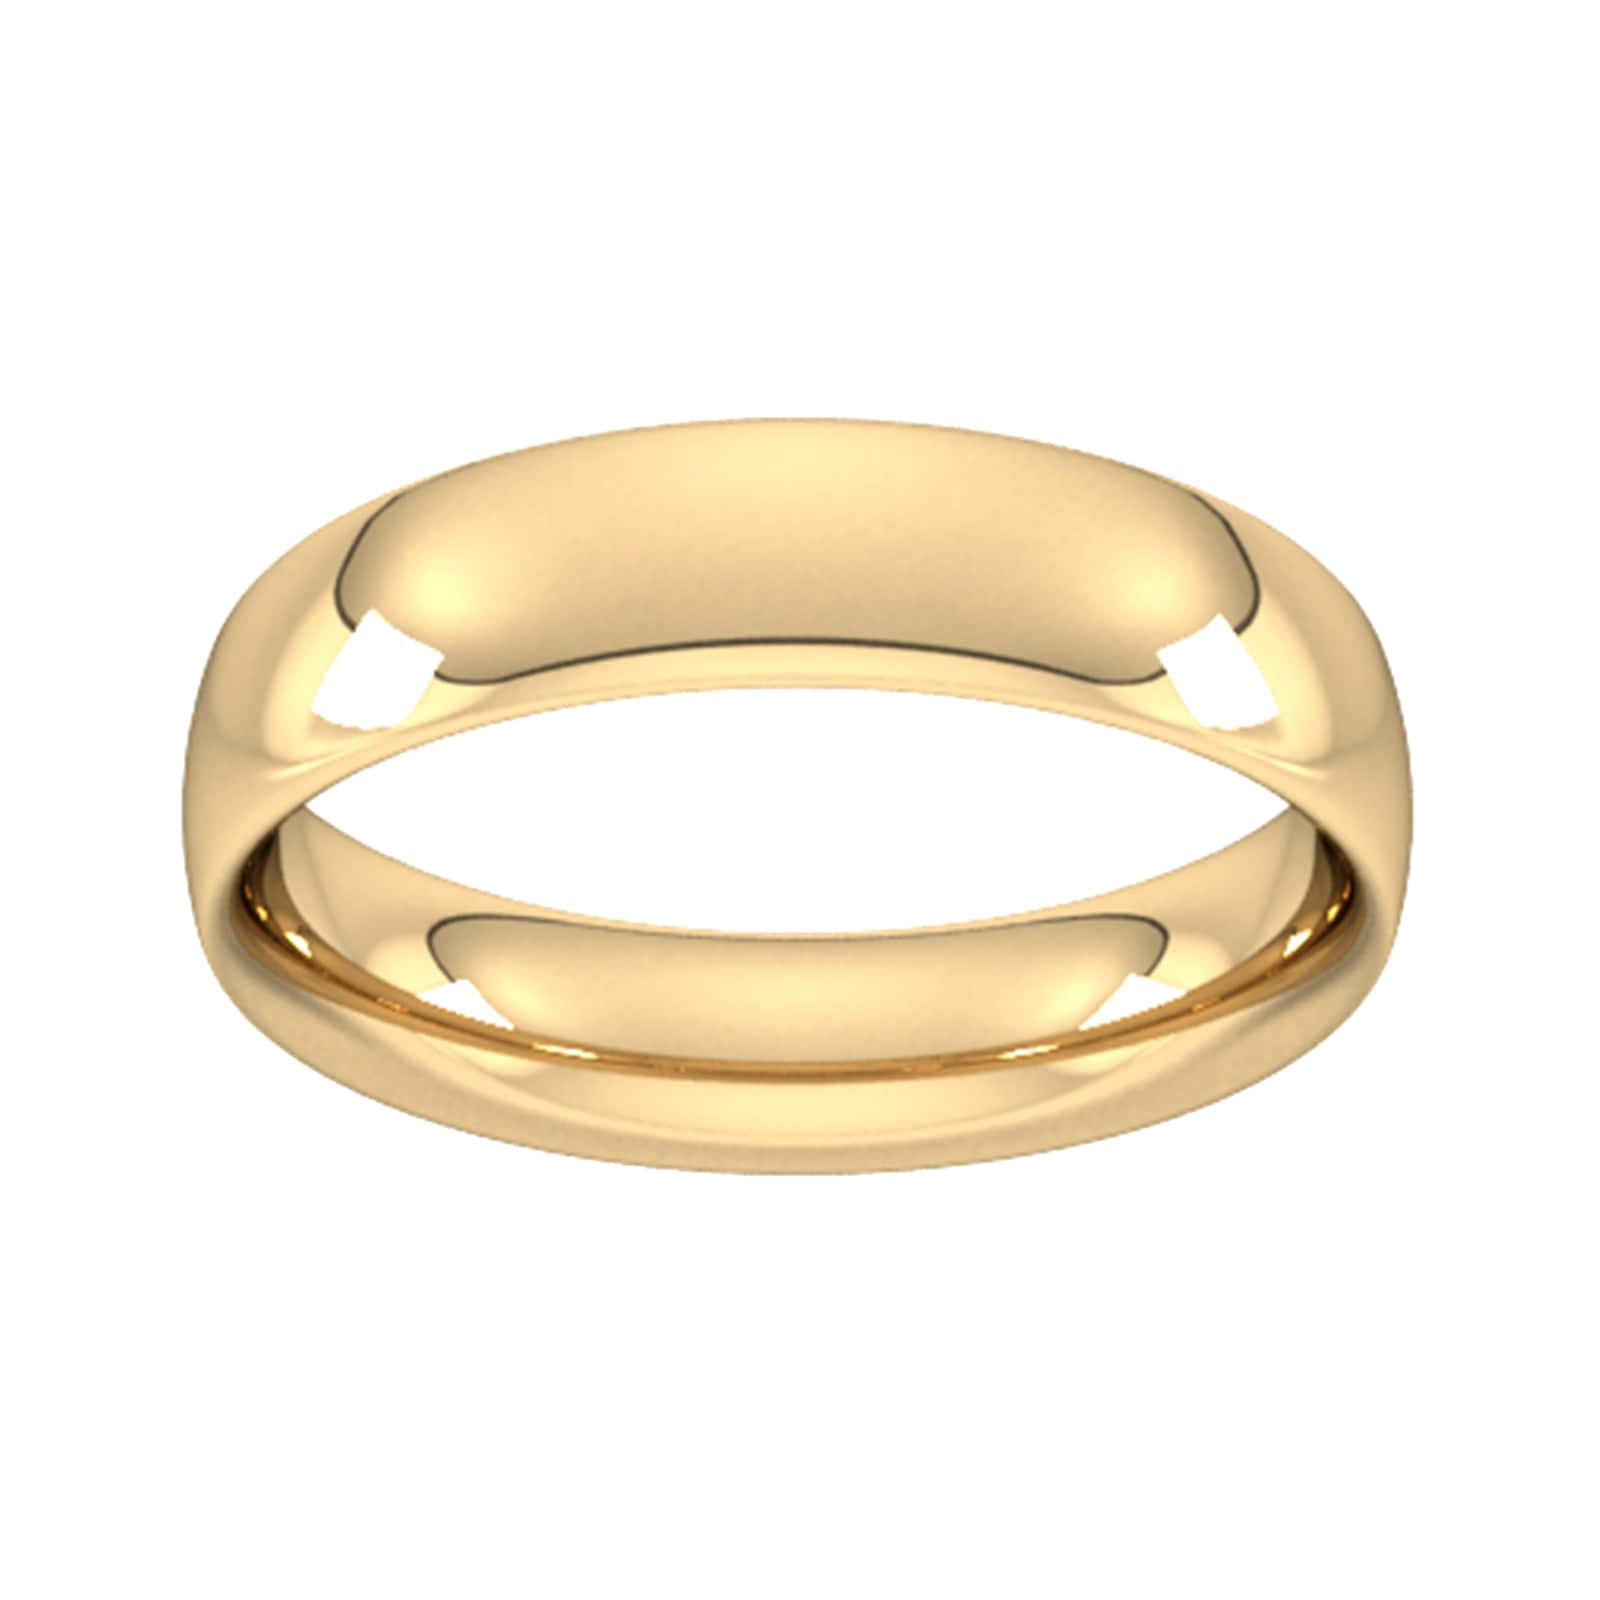 5mm Traditional Court Heavy Wedding Ring In 18 Carat Yellow Gold - Ring Size U